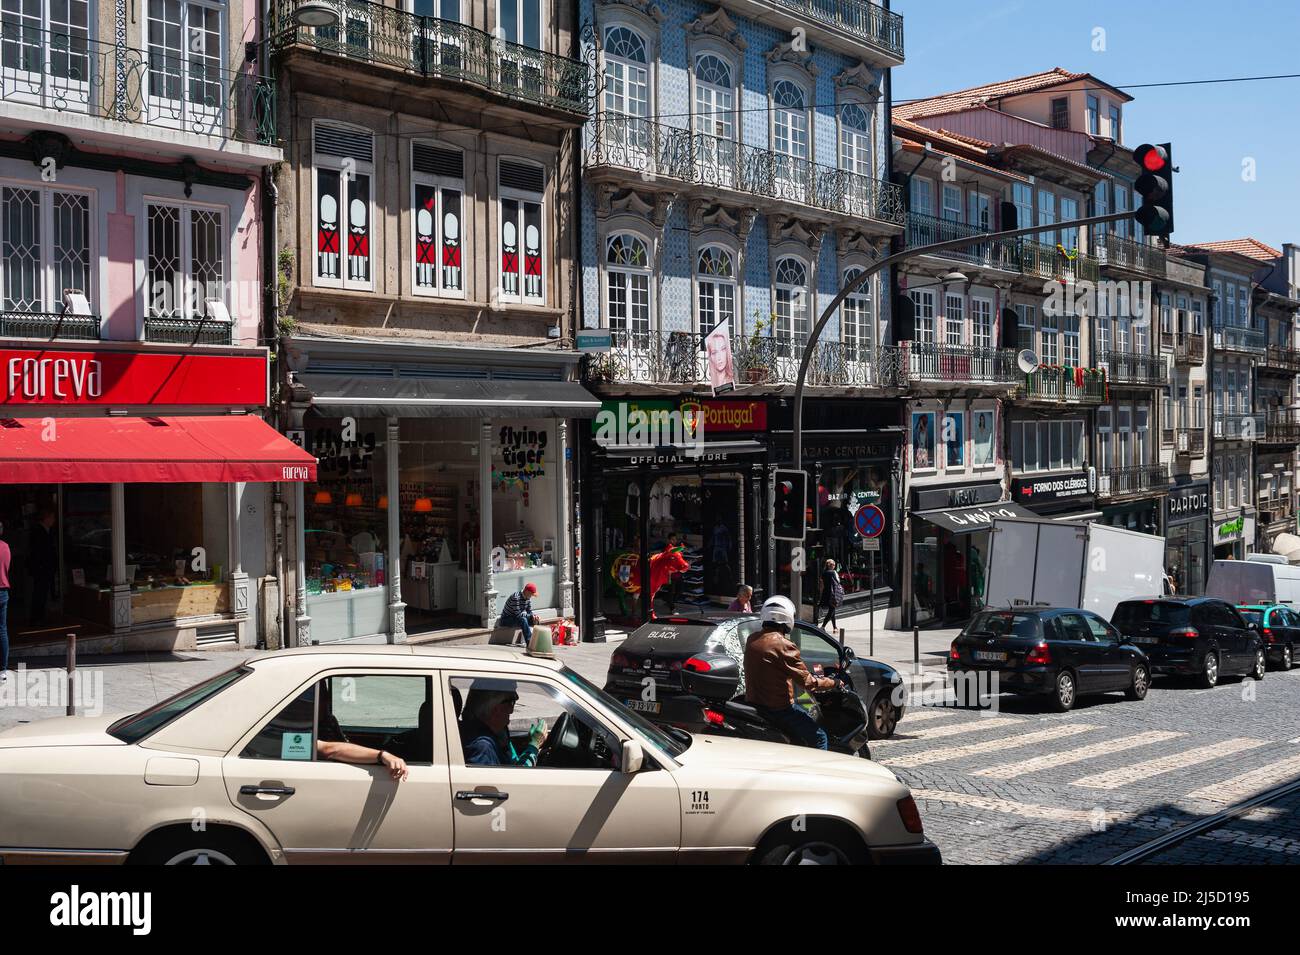 06/14/2018, Porto, Portugal, Europe - Everyday scene with city traffic and traditional residential and commercial buildings in the old town. [automated translation] Stock Photo